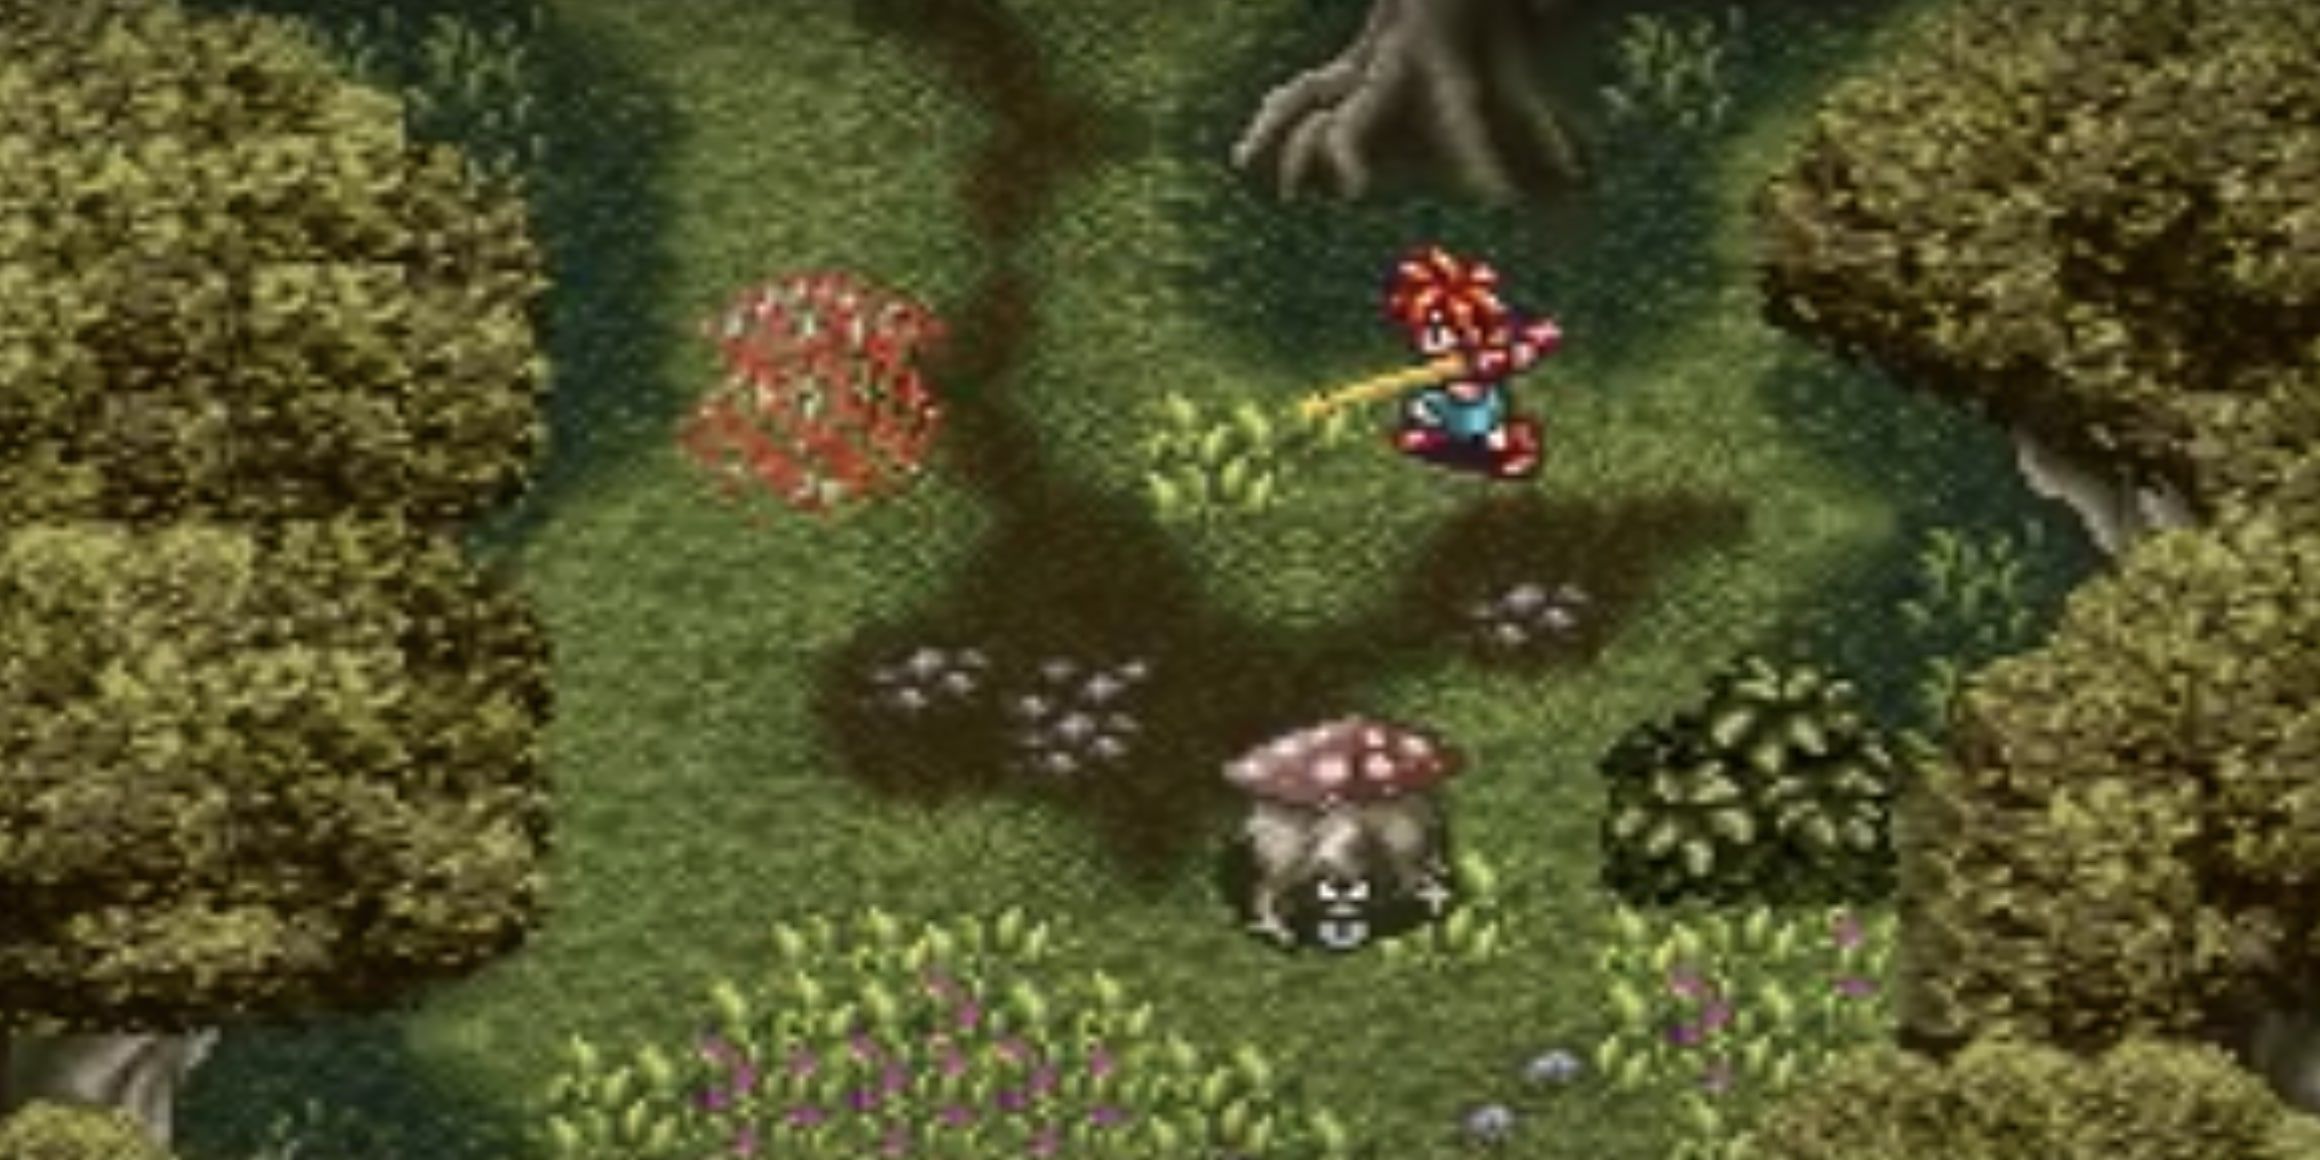 Crono from Chrono Trigger gameplay footage